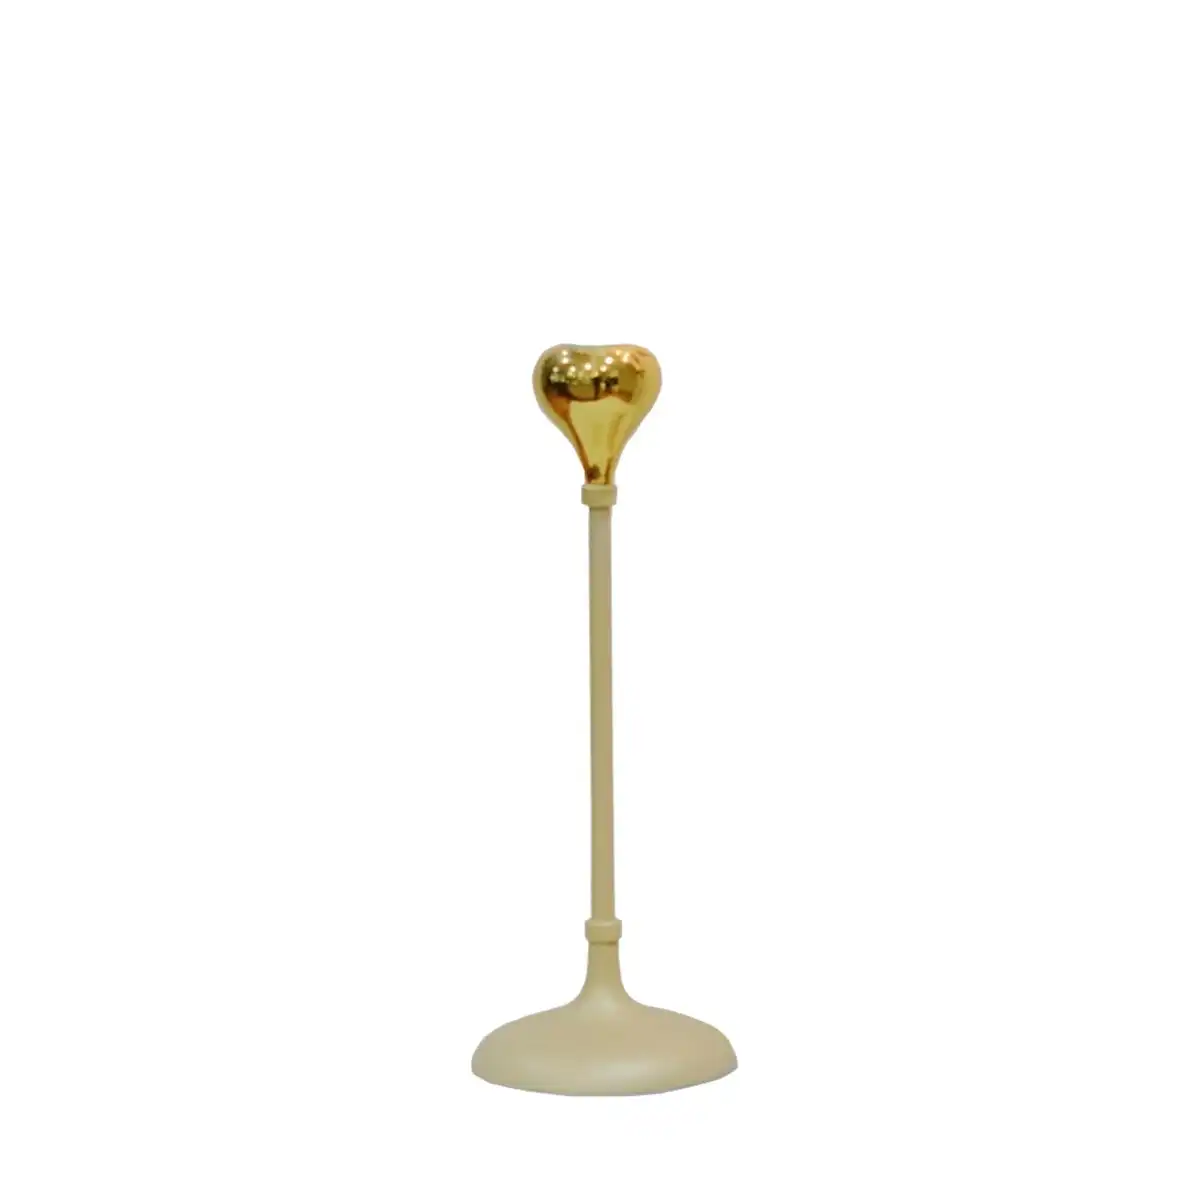 SSH Collection Tear Drop 24cm Tall Single Candle Holder - 2 Tone Gold